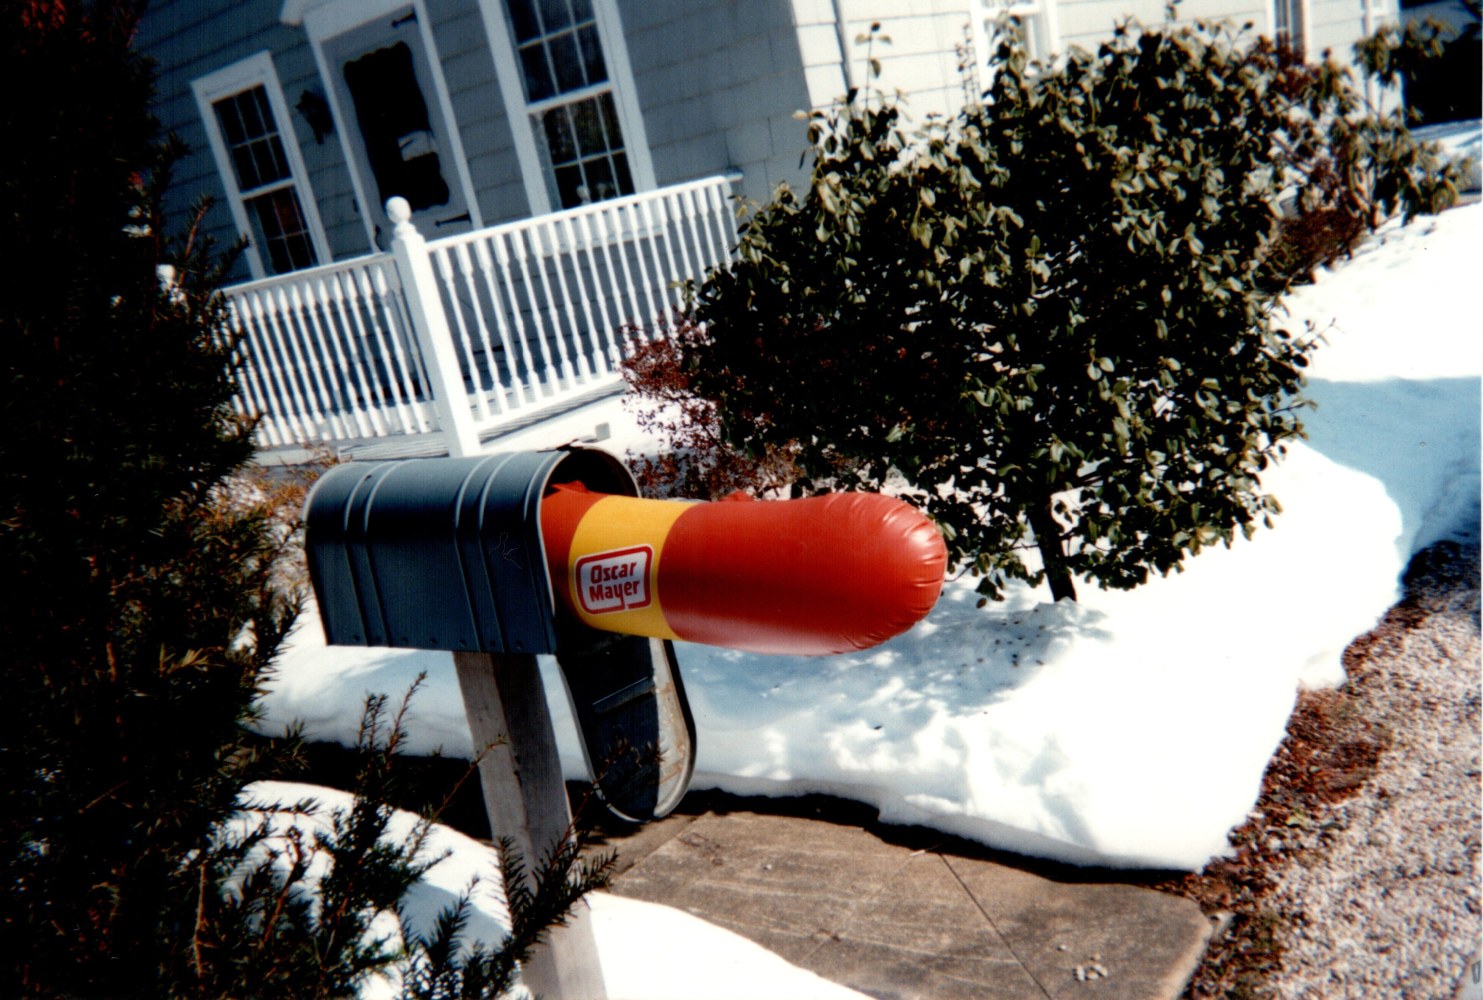 Ray Johnson, Untitled (Oscar Mayer Weiner in Mailbox), circa 1992-94, Commercially processed chromogenic print, 6 x 4 inches, Collection of The Morgan Library &amp;amp; Museum